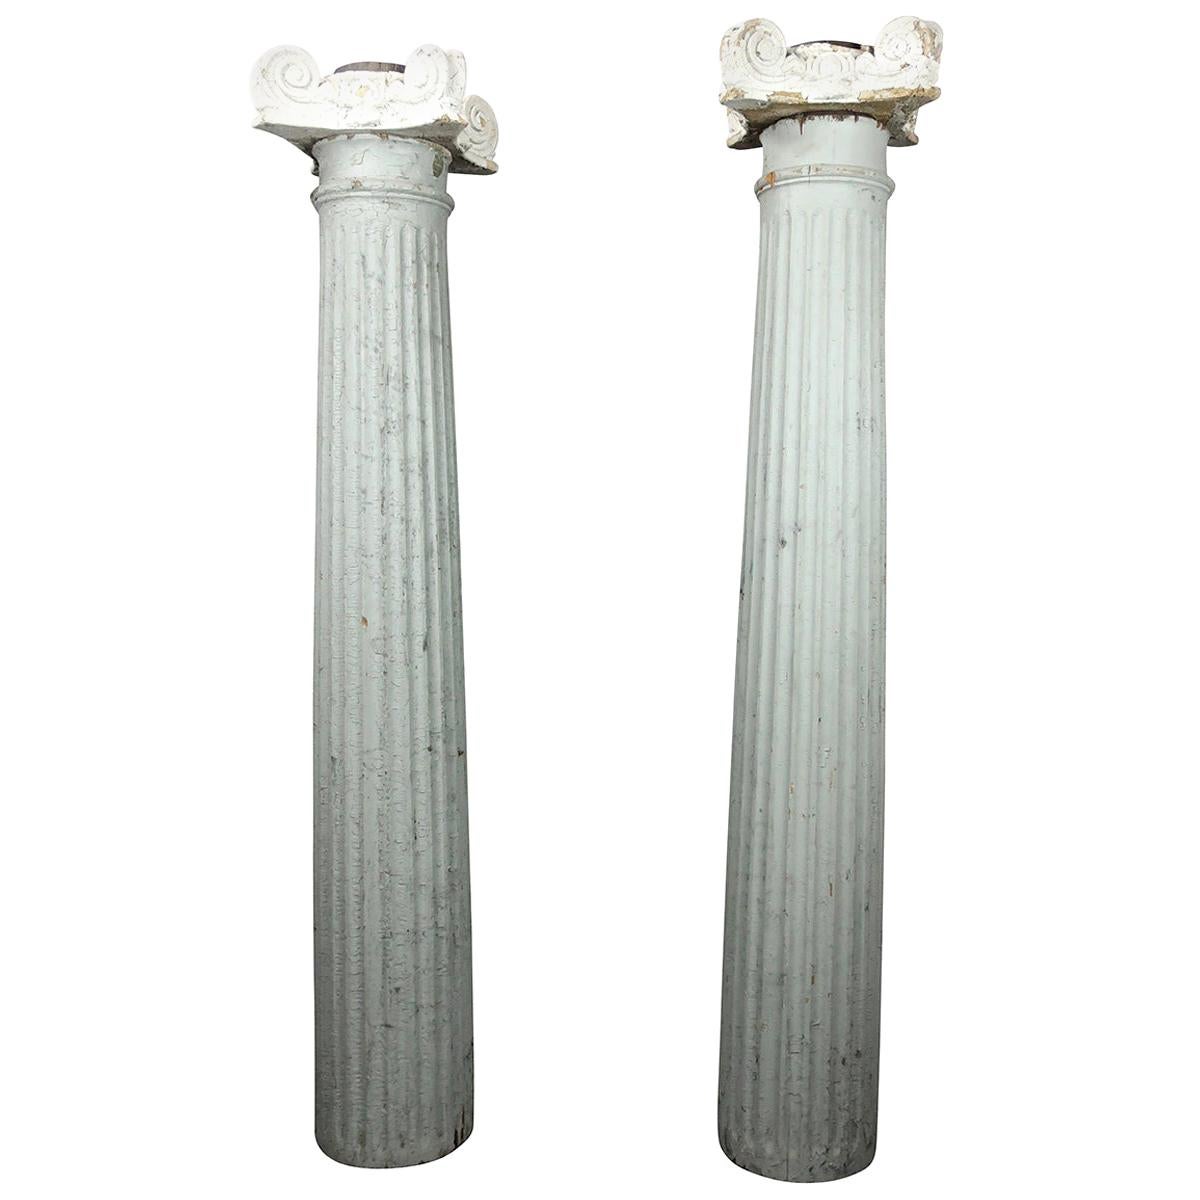 Pair of Painted Grey and White Wood Columns with Ionic Plaster and Wood Capitals